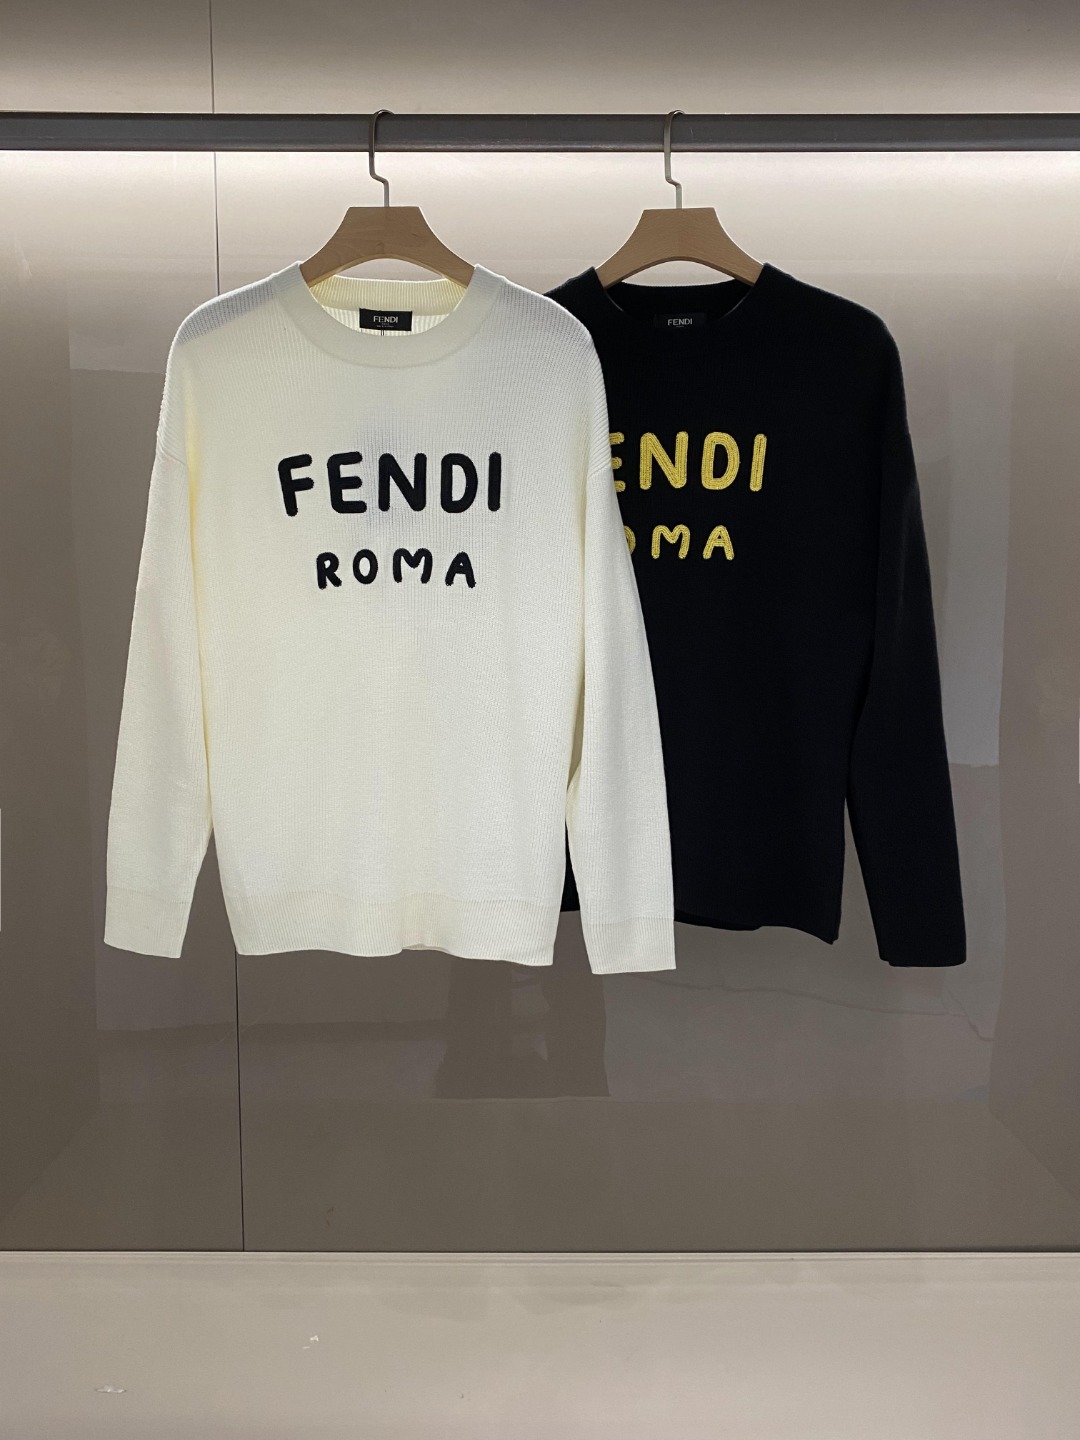 Where can I buy
 Fendi Clothing Sweatshirts Black White Cashmere Knitting Wool Spring/Fall Collection